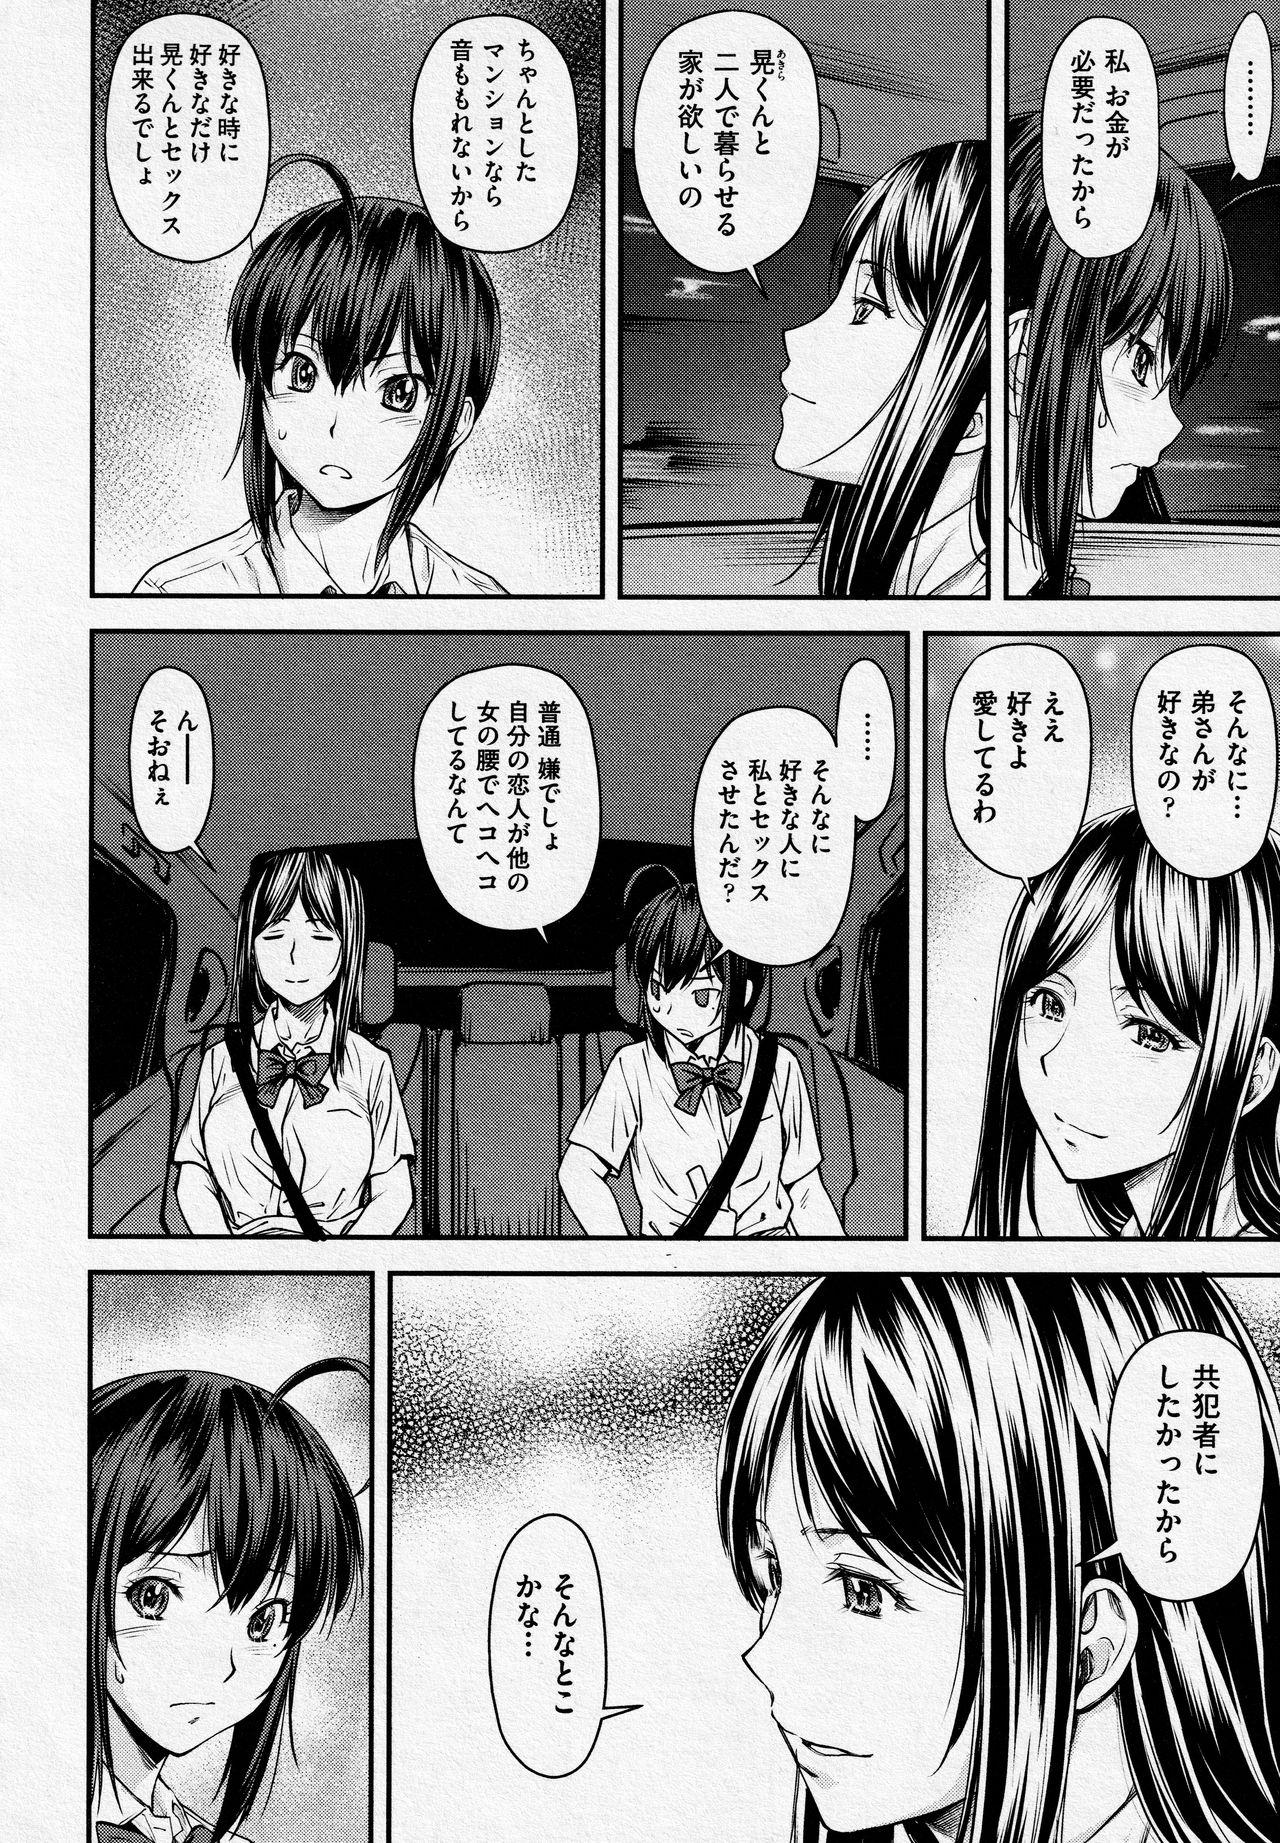 Gay Latino Kaname Date #14 Action - Page 2